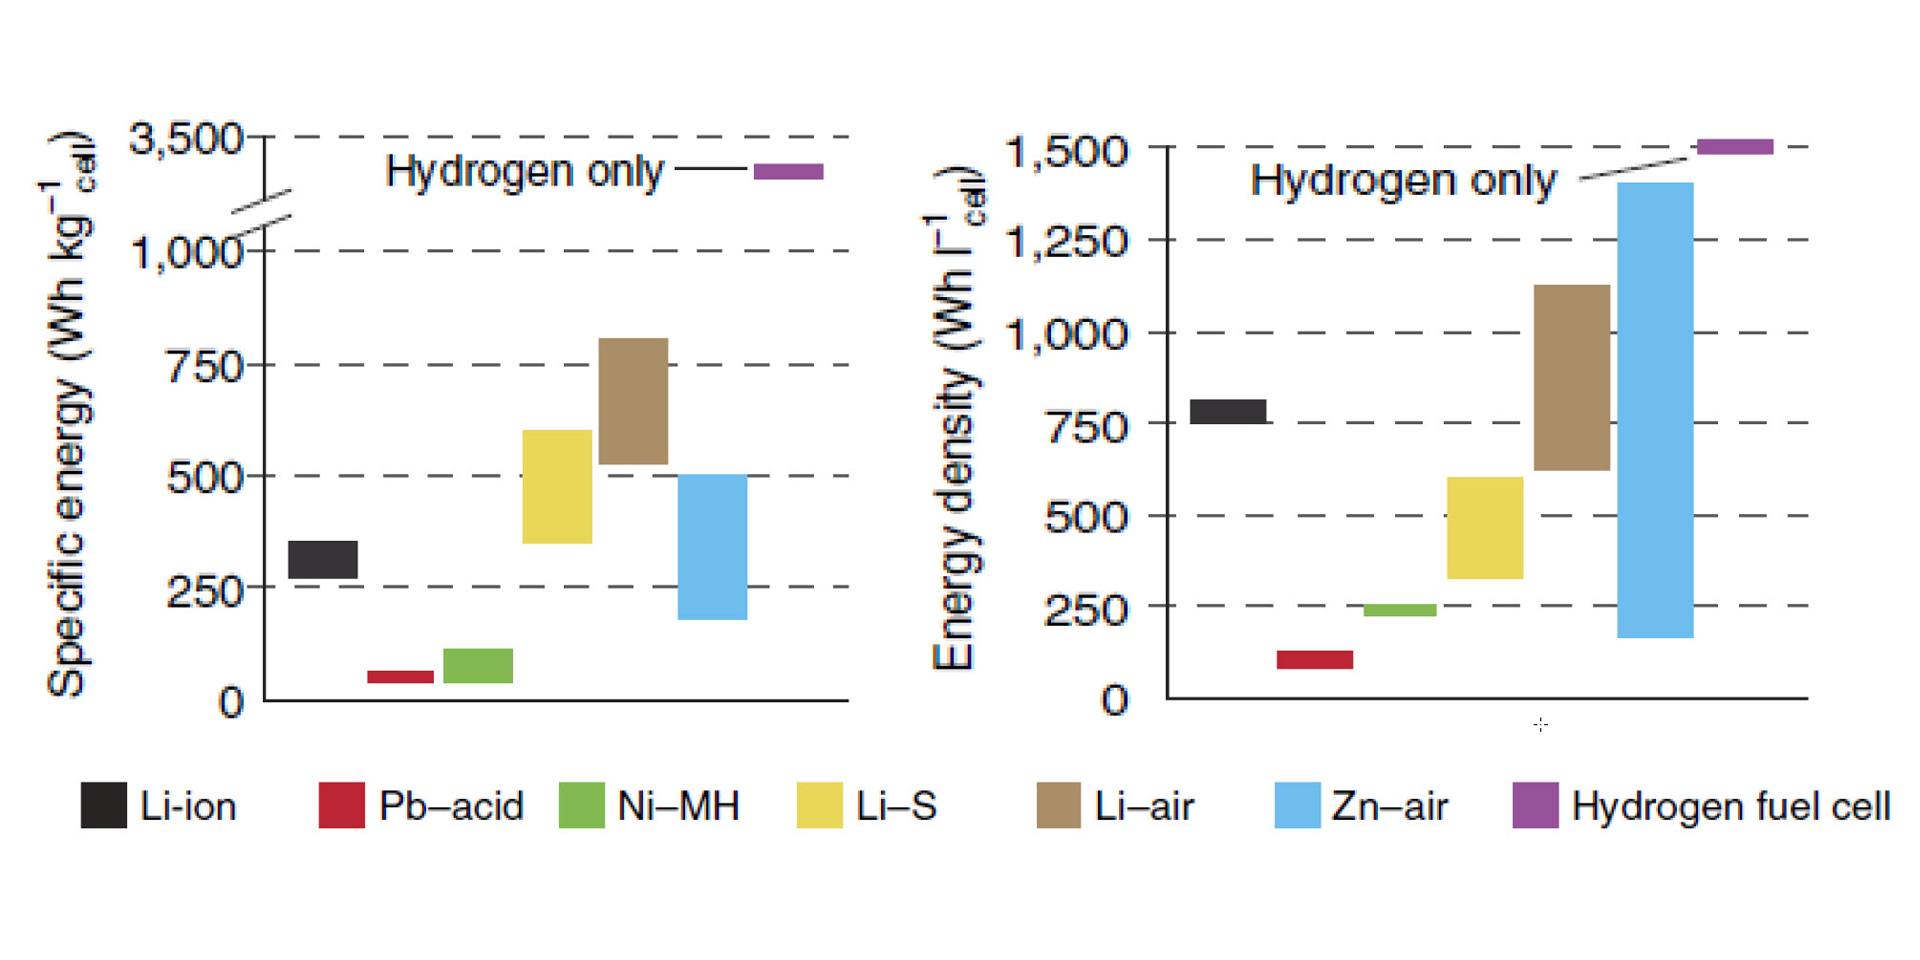 Characteristics of rechargeable batteries and hydrogen fuel cells